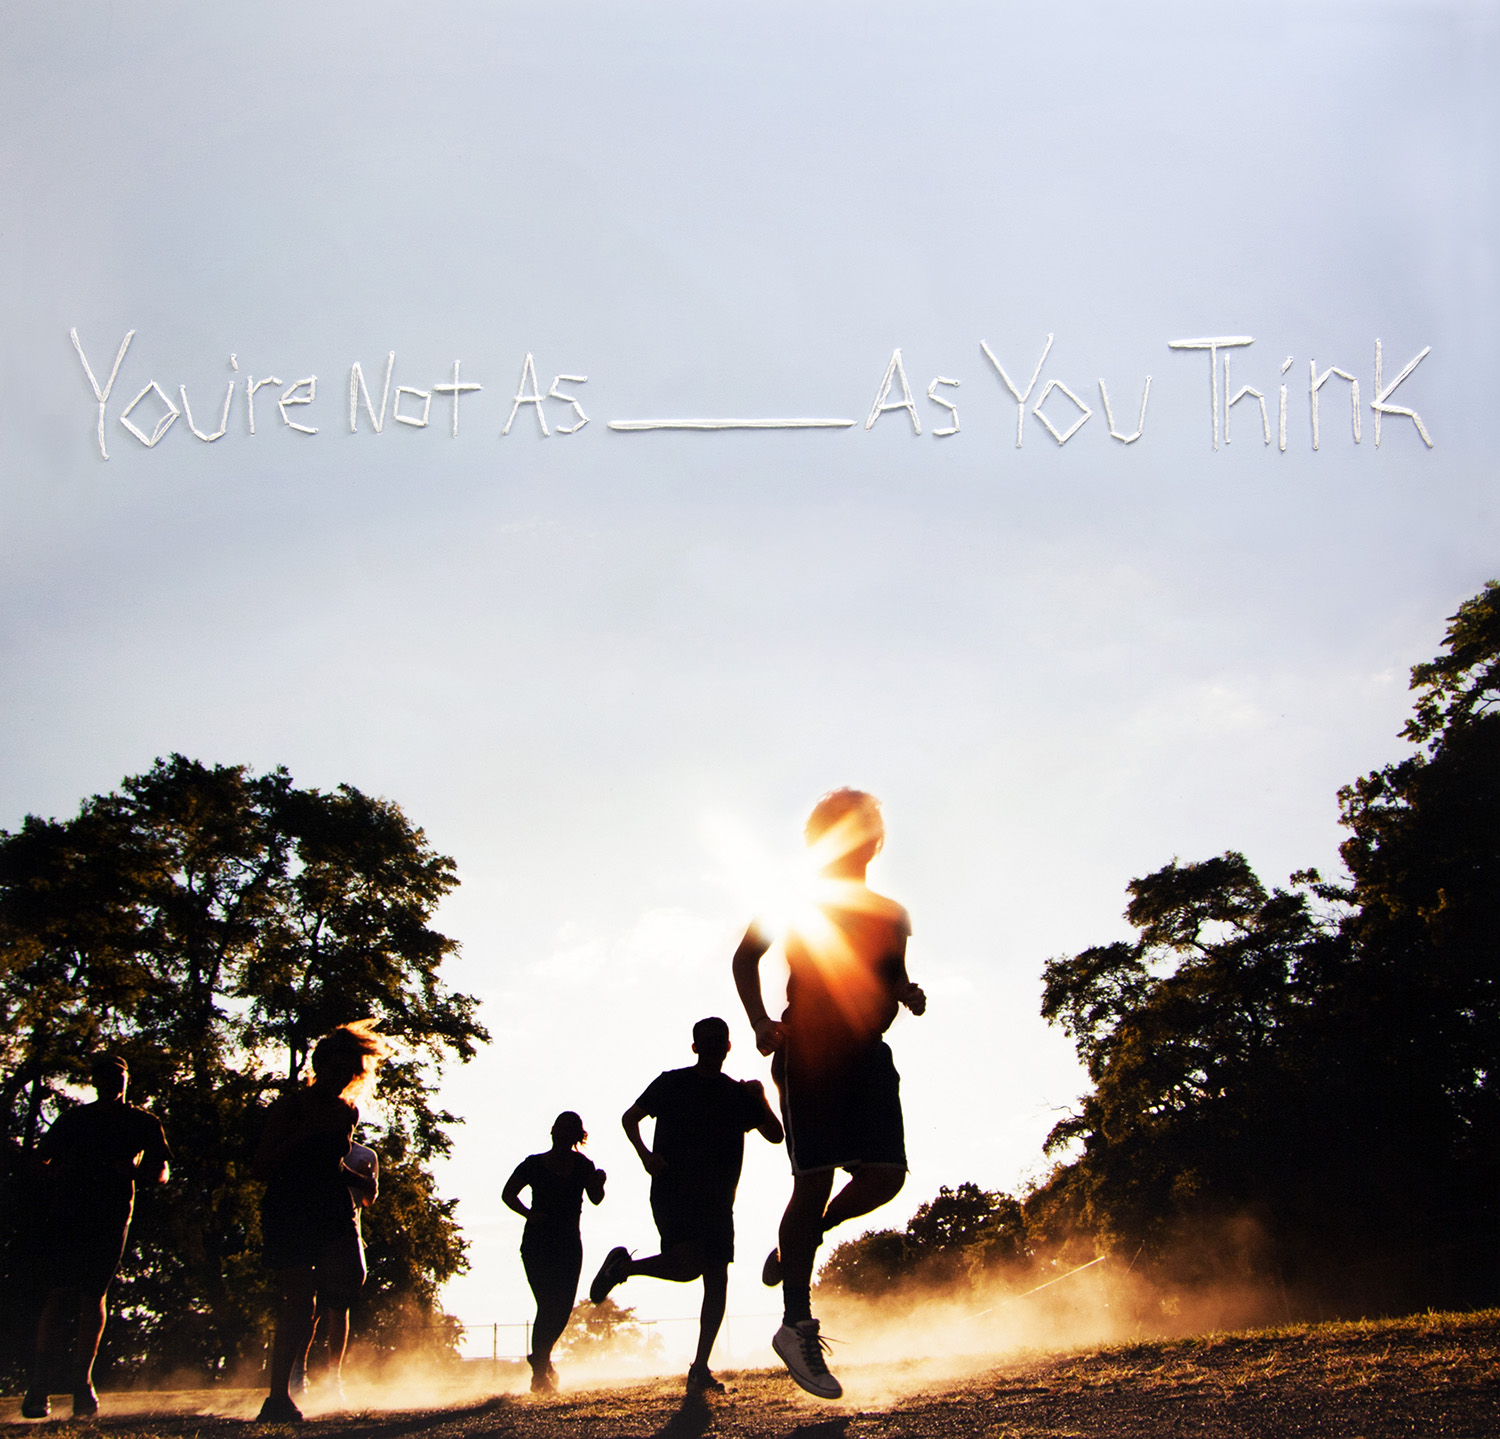 Sorority Noise – You’re Not As _____ As You Think